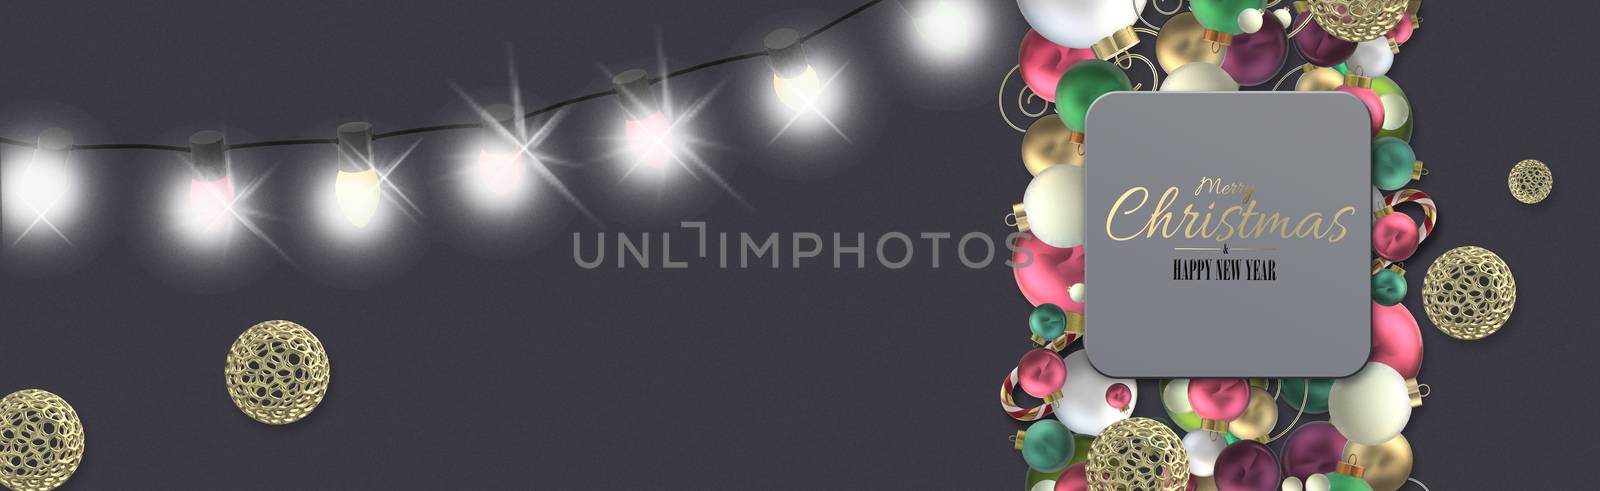 Horizontal Christmas background with beautiful Xmas ornament, Xmas realistic balls baubles, string of shiny lights over black. Text Merry Christmas Happy New Year. 3D render. Copy space, mock up